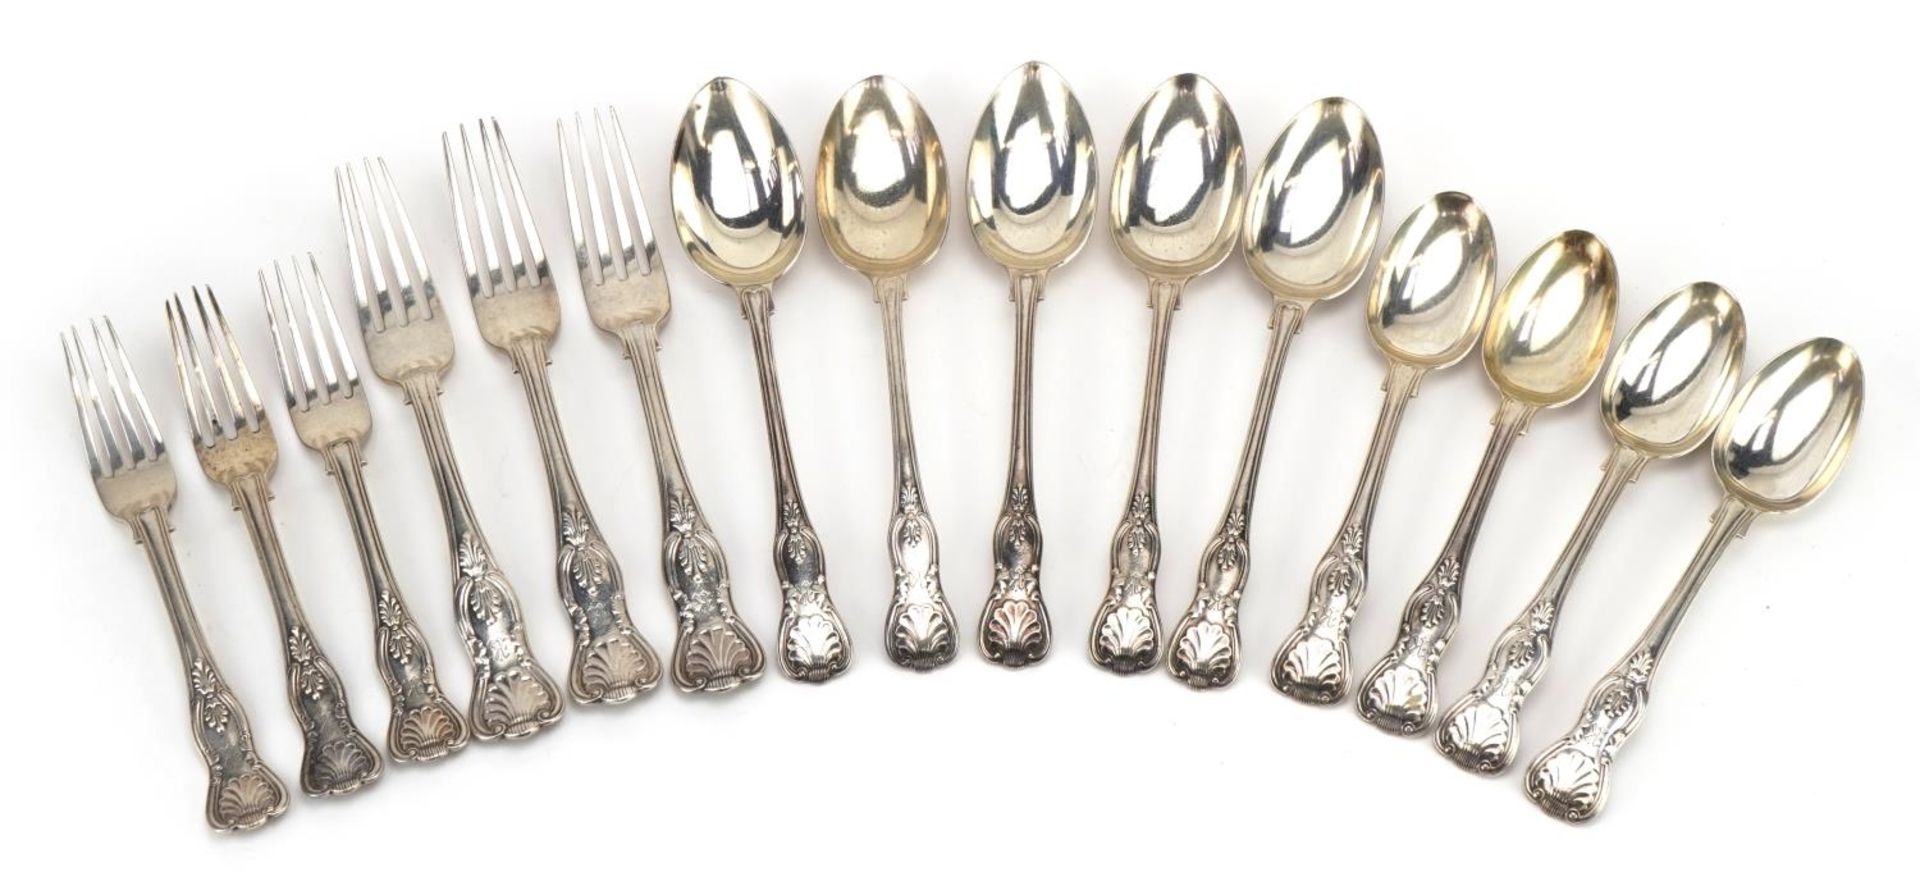 Elkington & Co Ltd, Edwardian silver cutlery comprising three table forks, five tablespoons, four